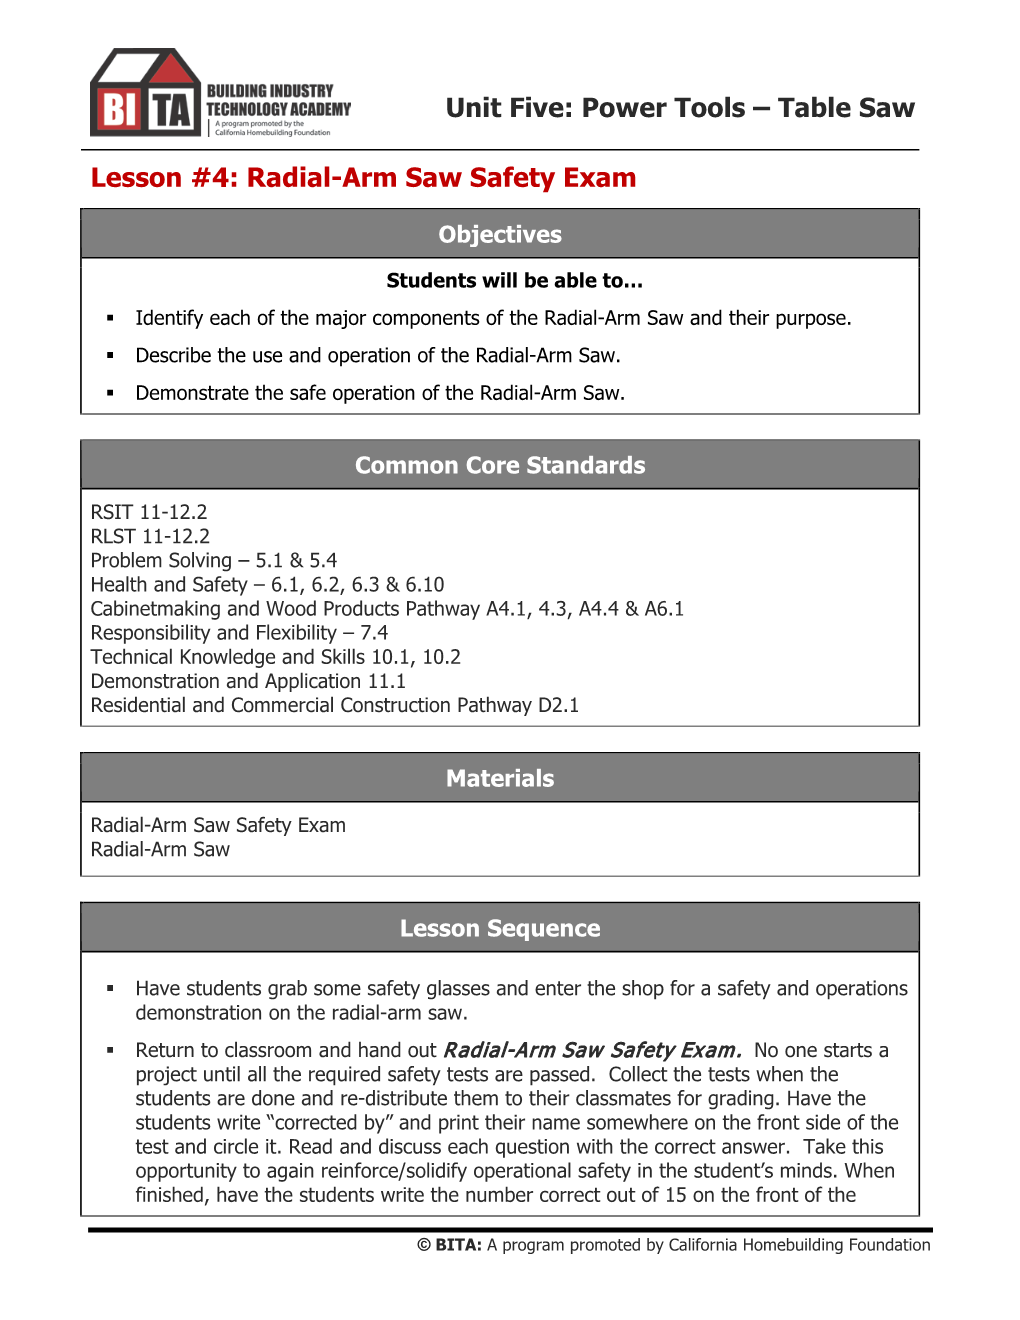 Lesson #4: Radial-Arm Saw Safety Exam